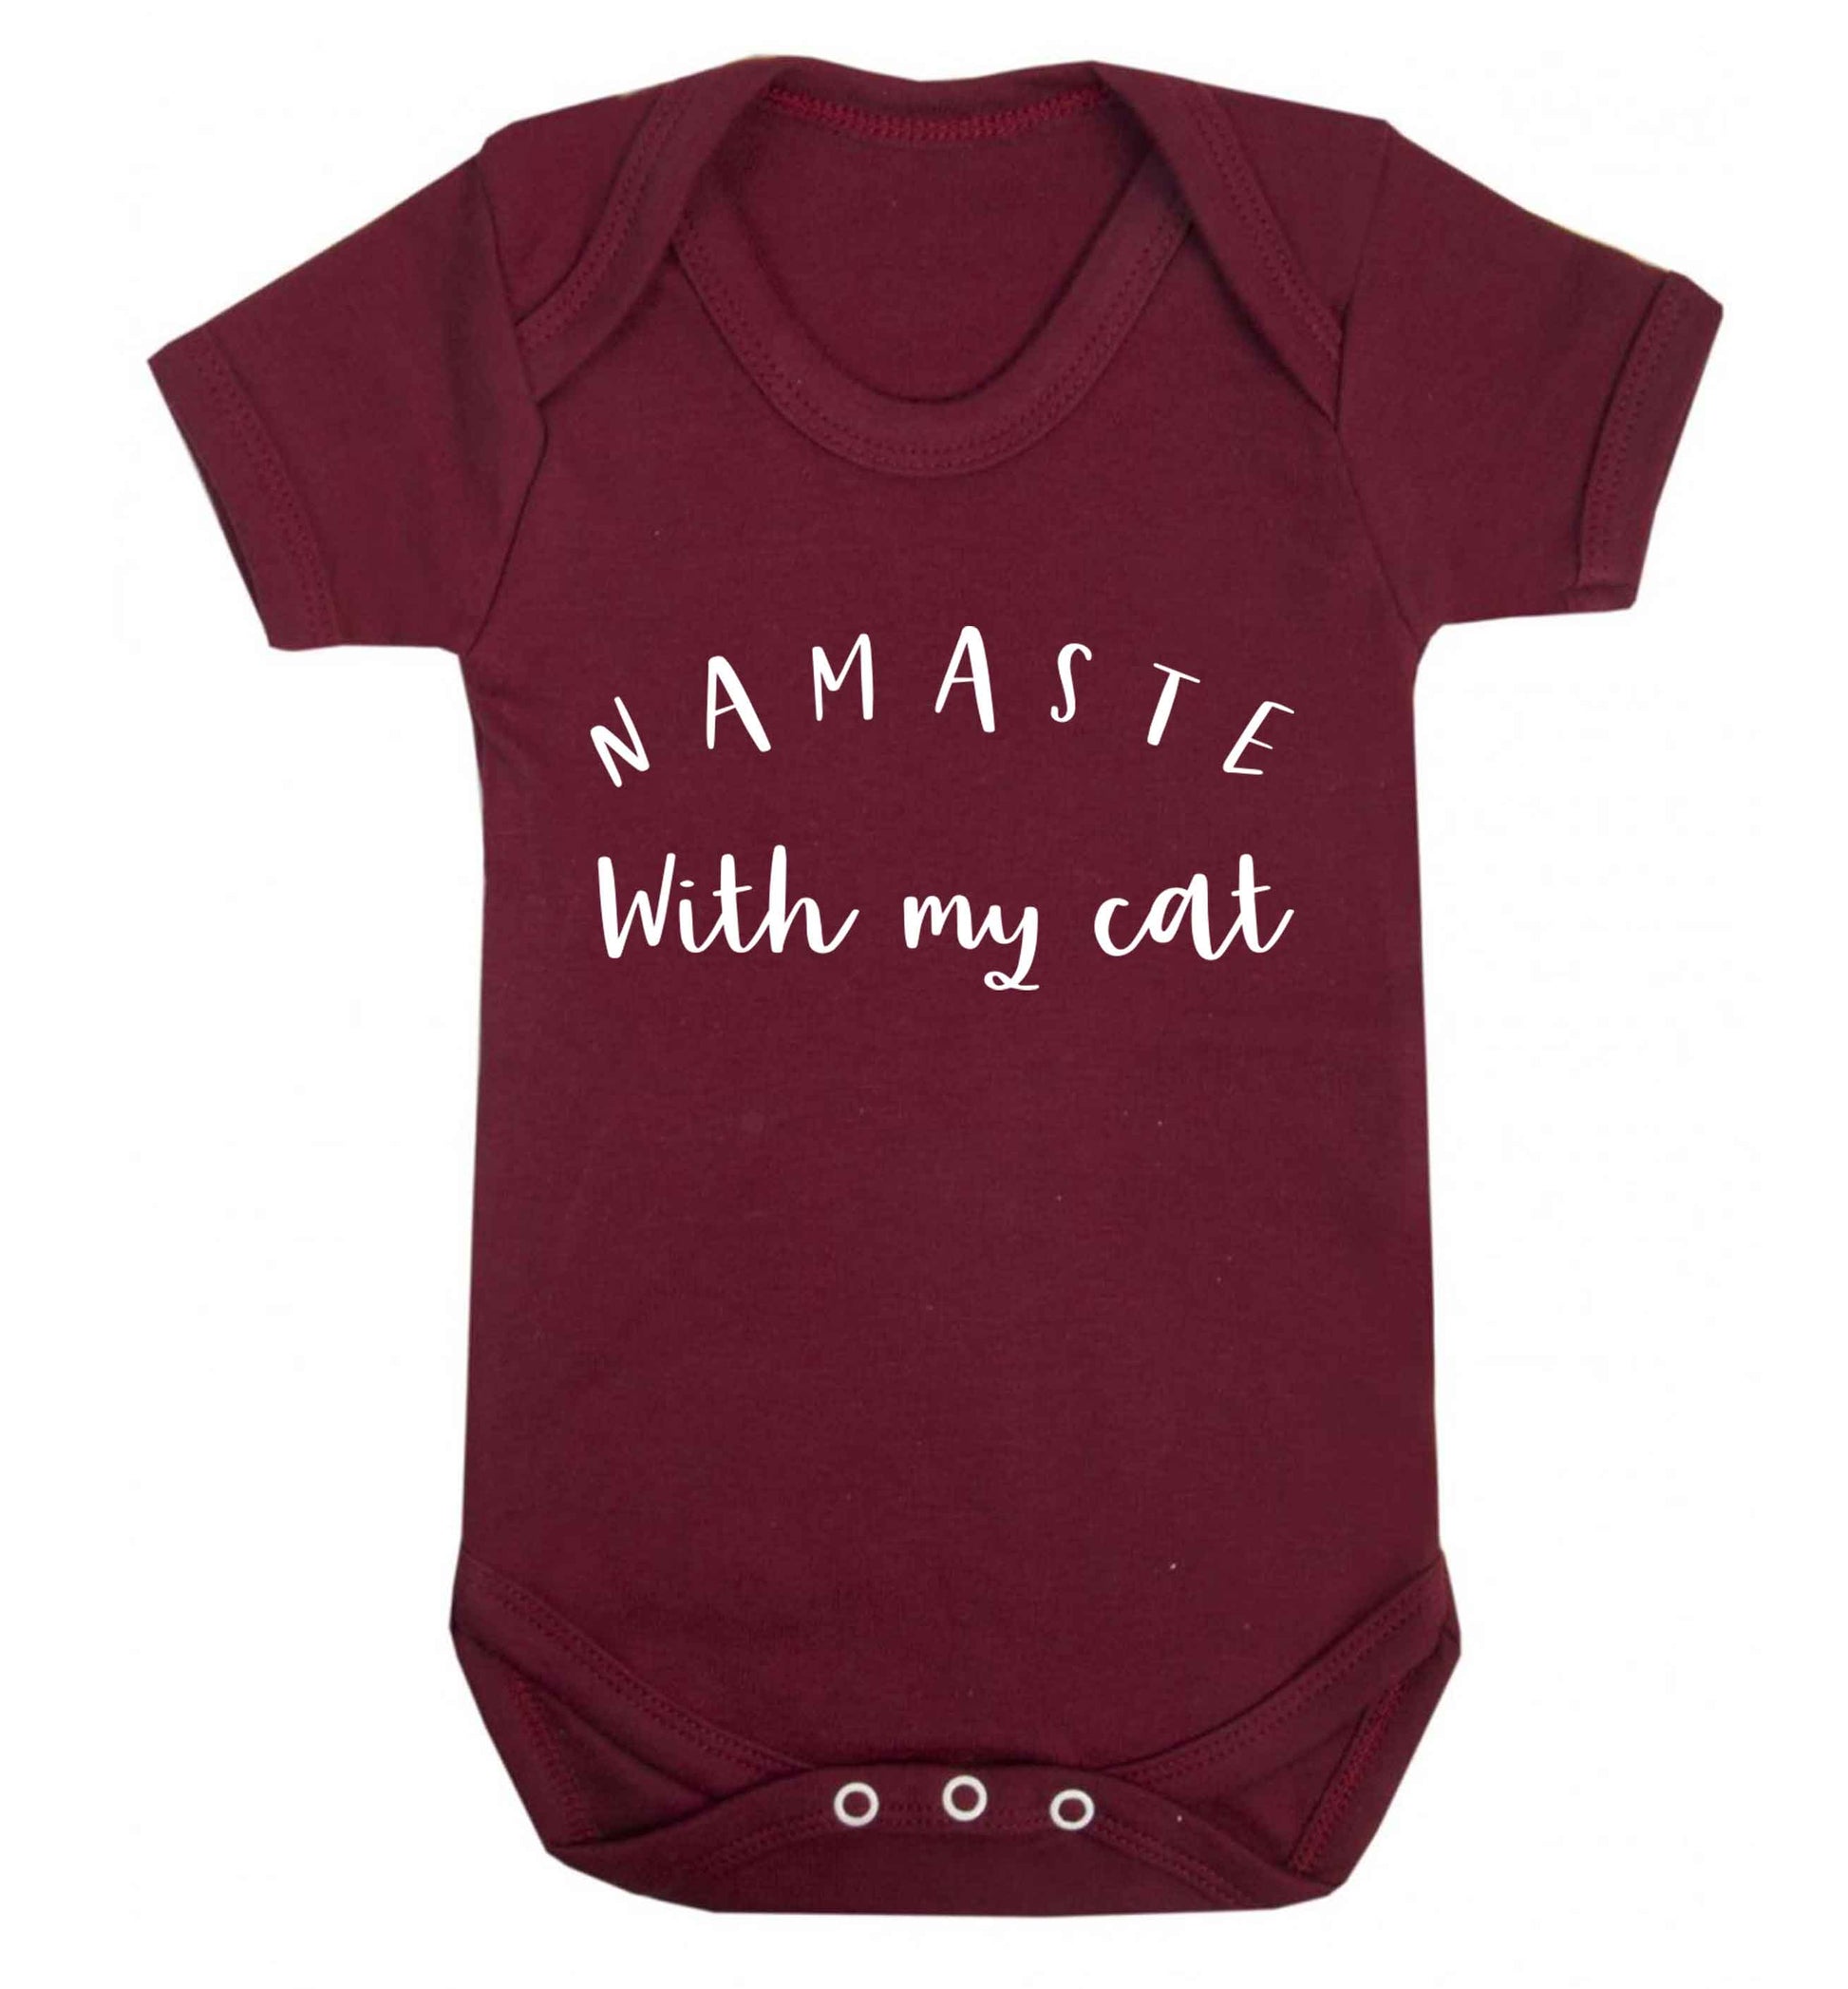 Namaste with my cat Baby Vest maroon 18-24 months